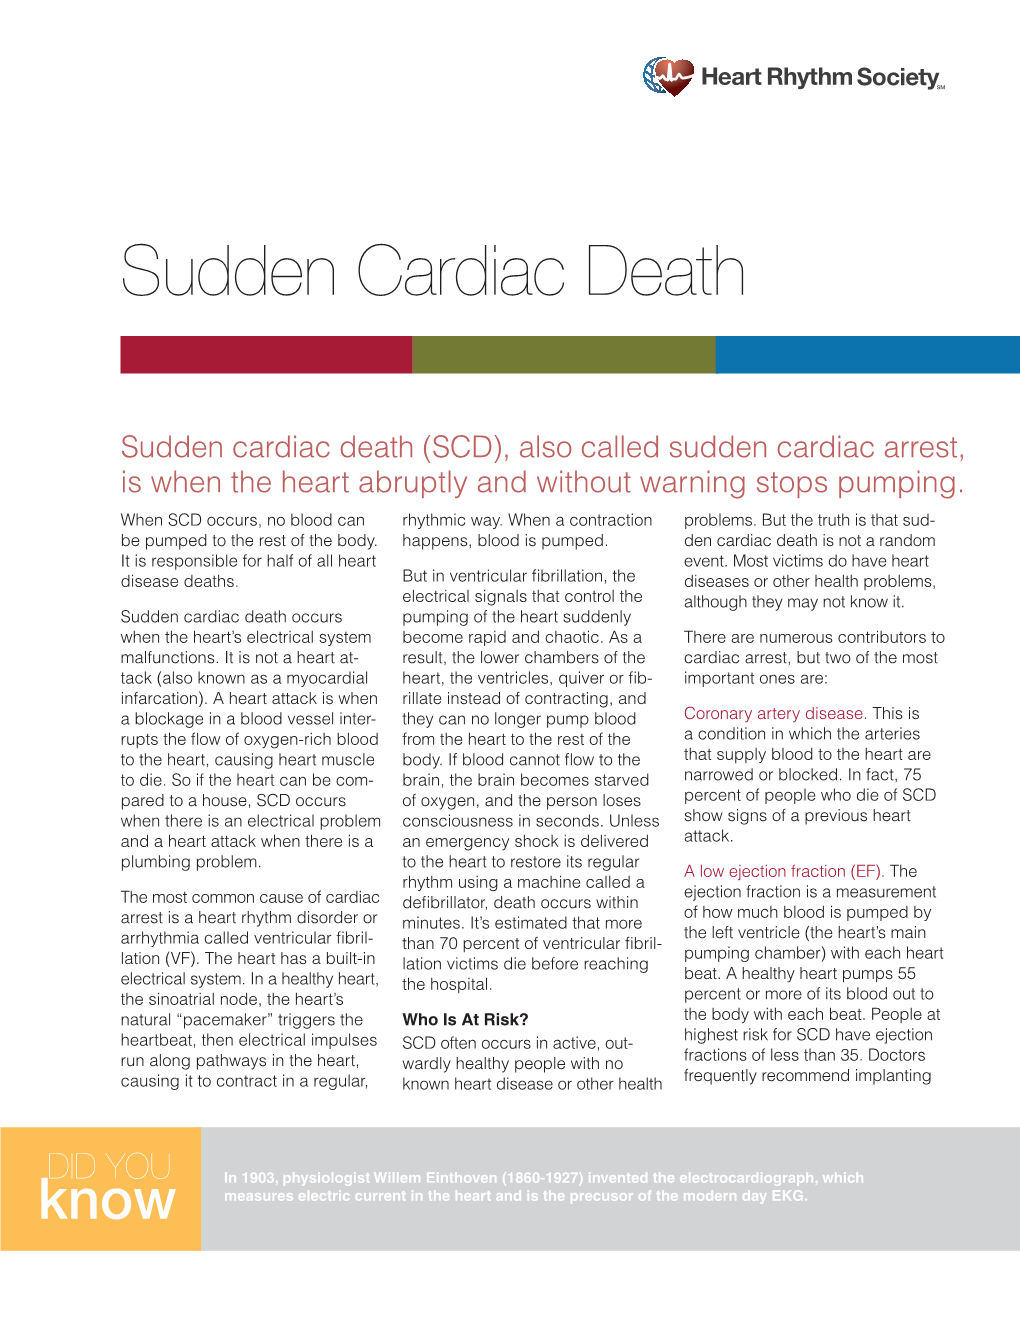 Sudden Cardiac Death (SCD), Also Called Sudden Cardiac Arrest, Is When the Heart Abruptly and Without Warning Stops Pumping